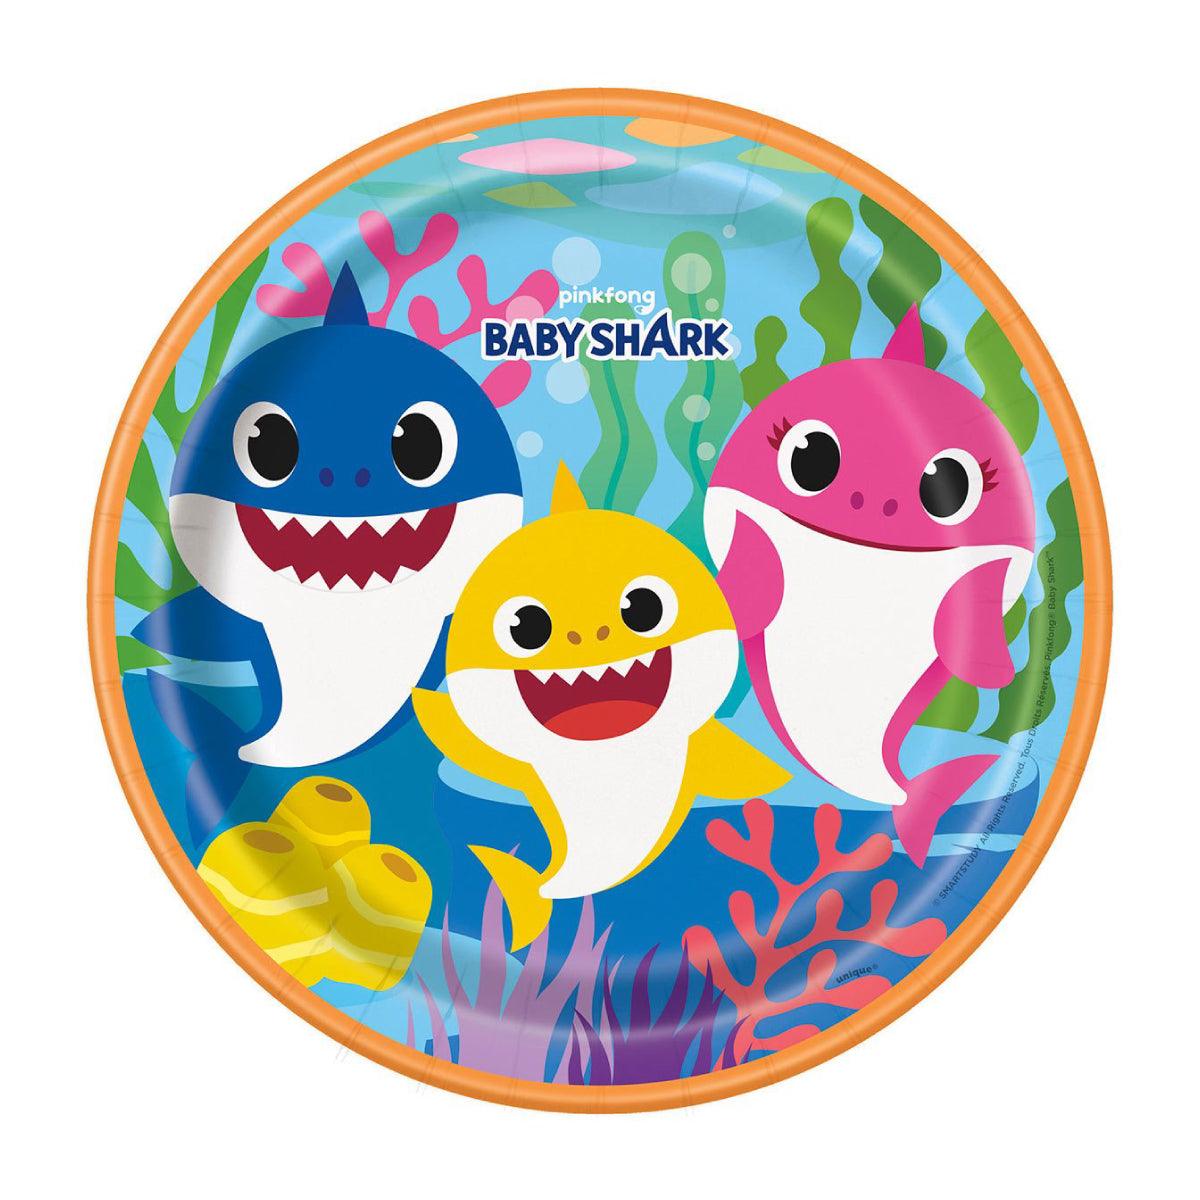 Pinkfong] Baby Shark Family Balloons Bouquet - Give Fun